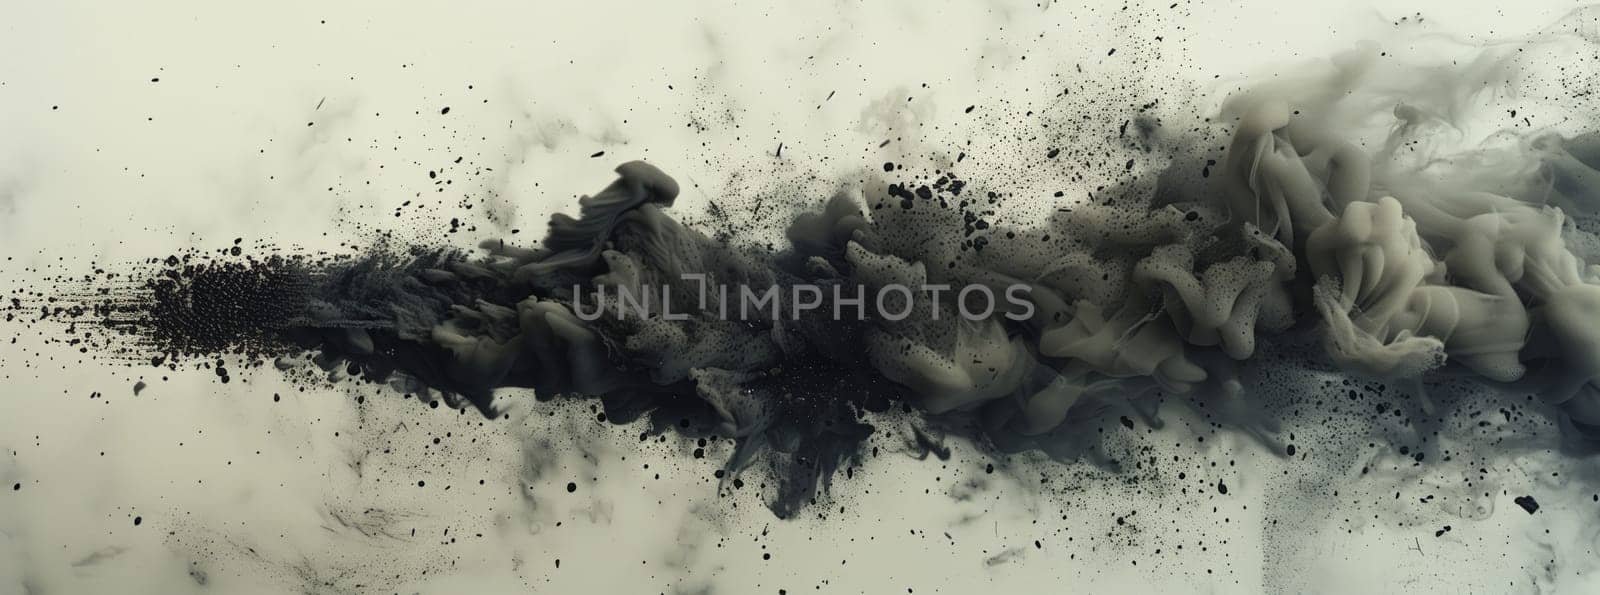 Cloud of smoke emerging from a pipe against a white background by richwolf